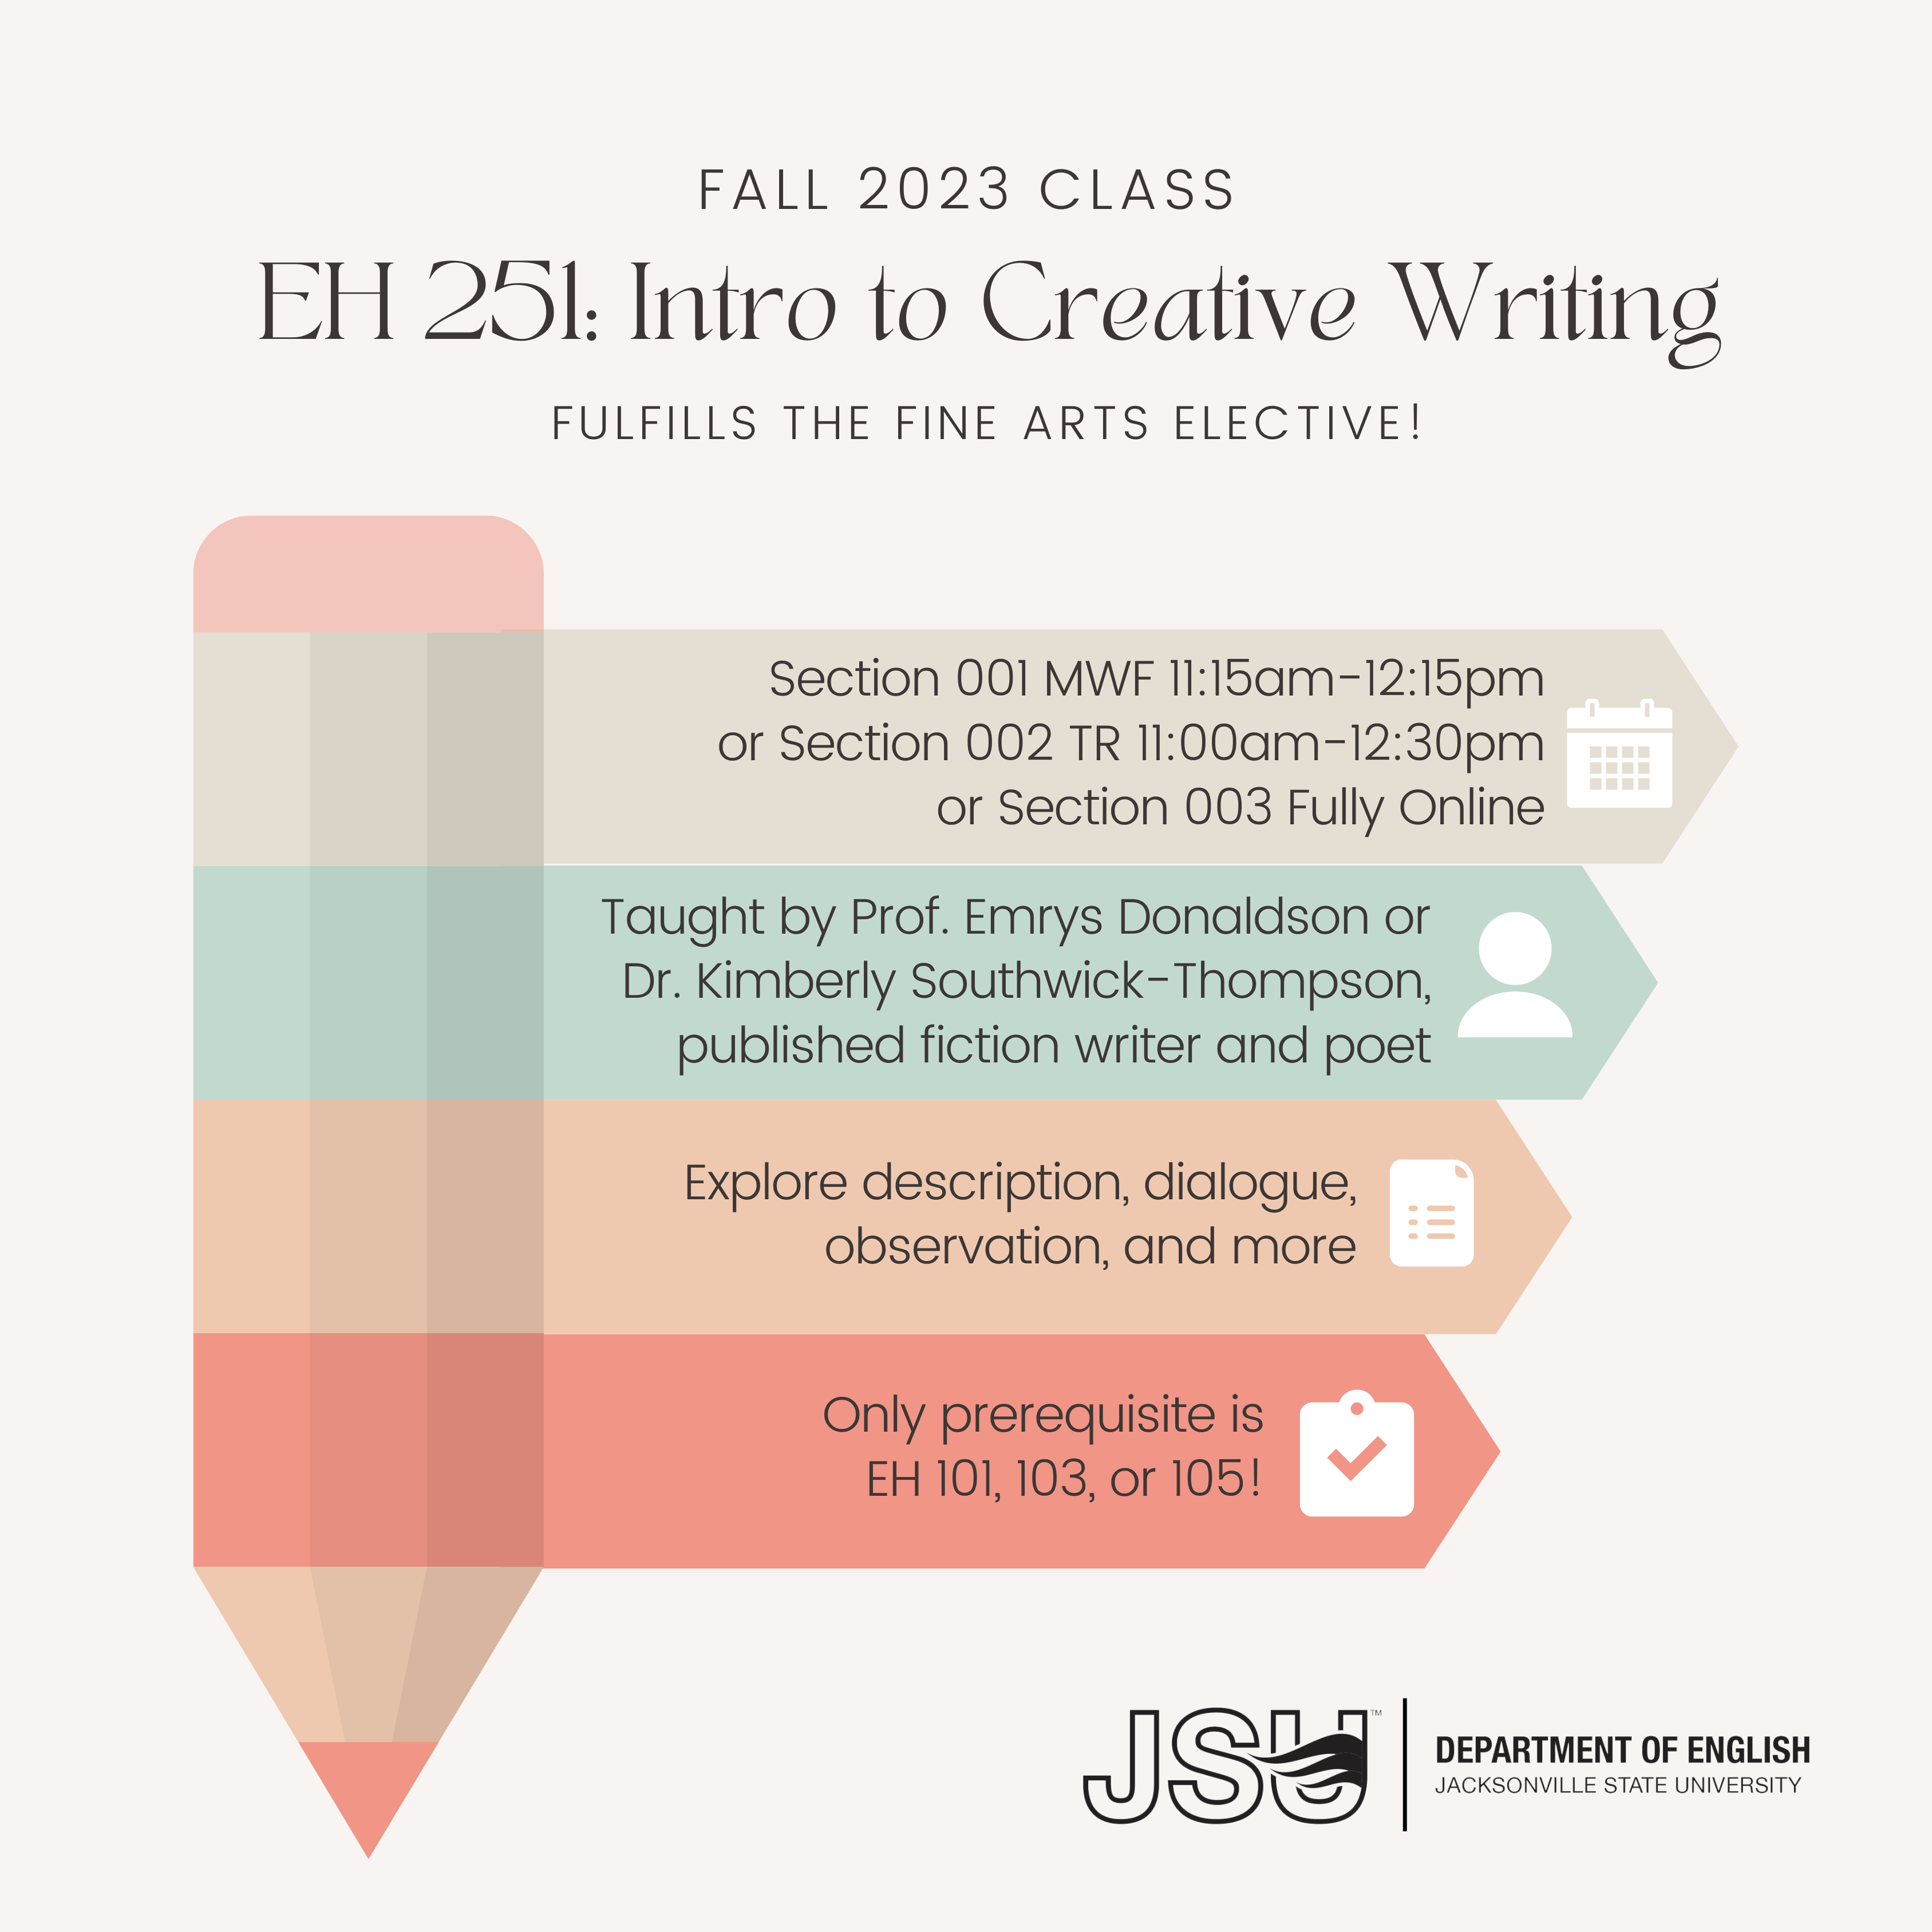 A flyer for EH 251, introduction to creative writing. This class fills the fine arts elective. Section 1 meets MWF from 11:15 am - 12:15 pm, Section 2 meets Tuesday-Thursday from 11 am - 12:30 pm, or Section 3 is fully online. Taught by Professor Emrys Donaldson or Dr Kimberly Southwick-Thompson, published fiction writer and poet. Explore description, dialogue, observation and more